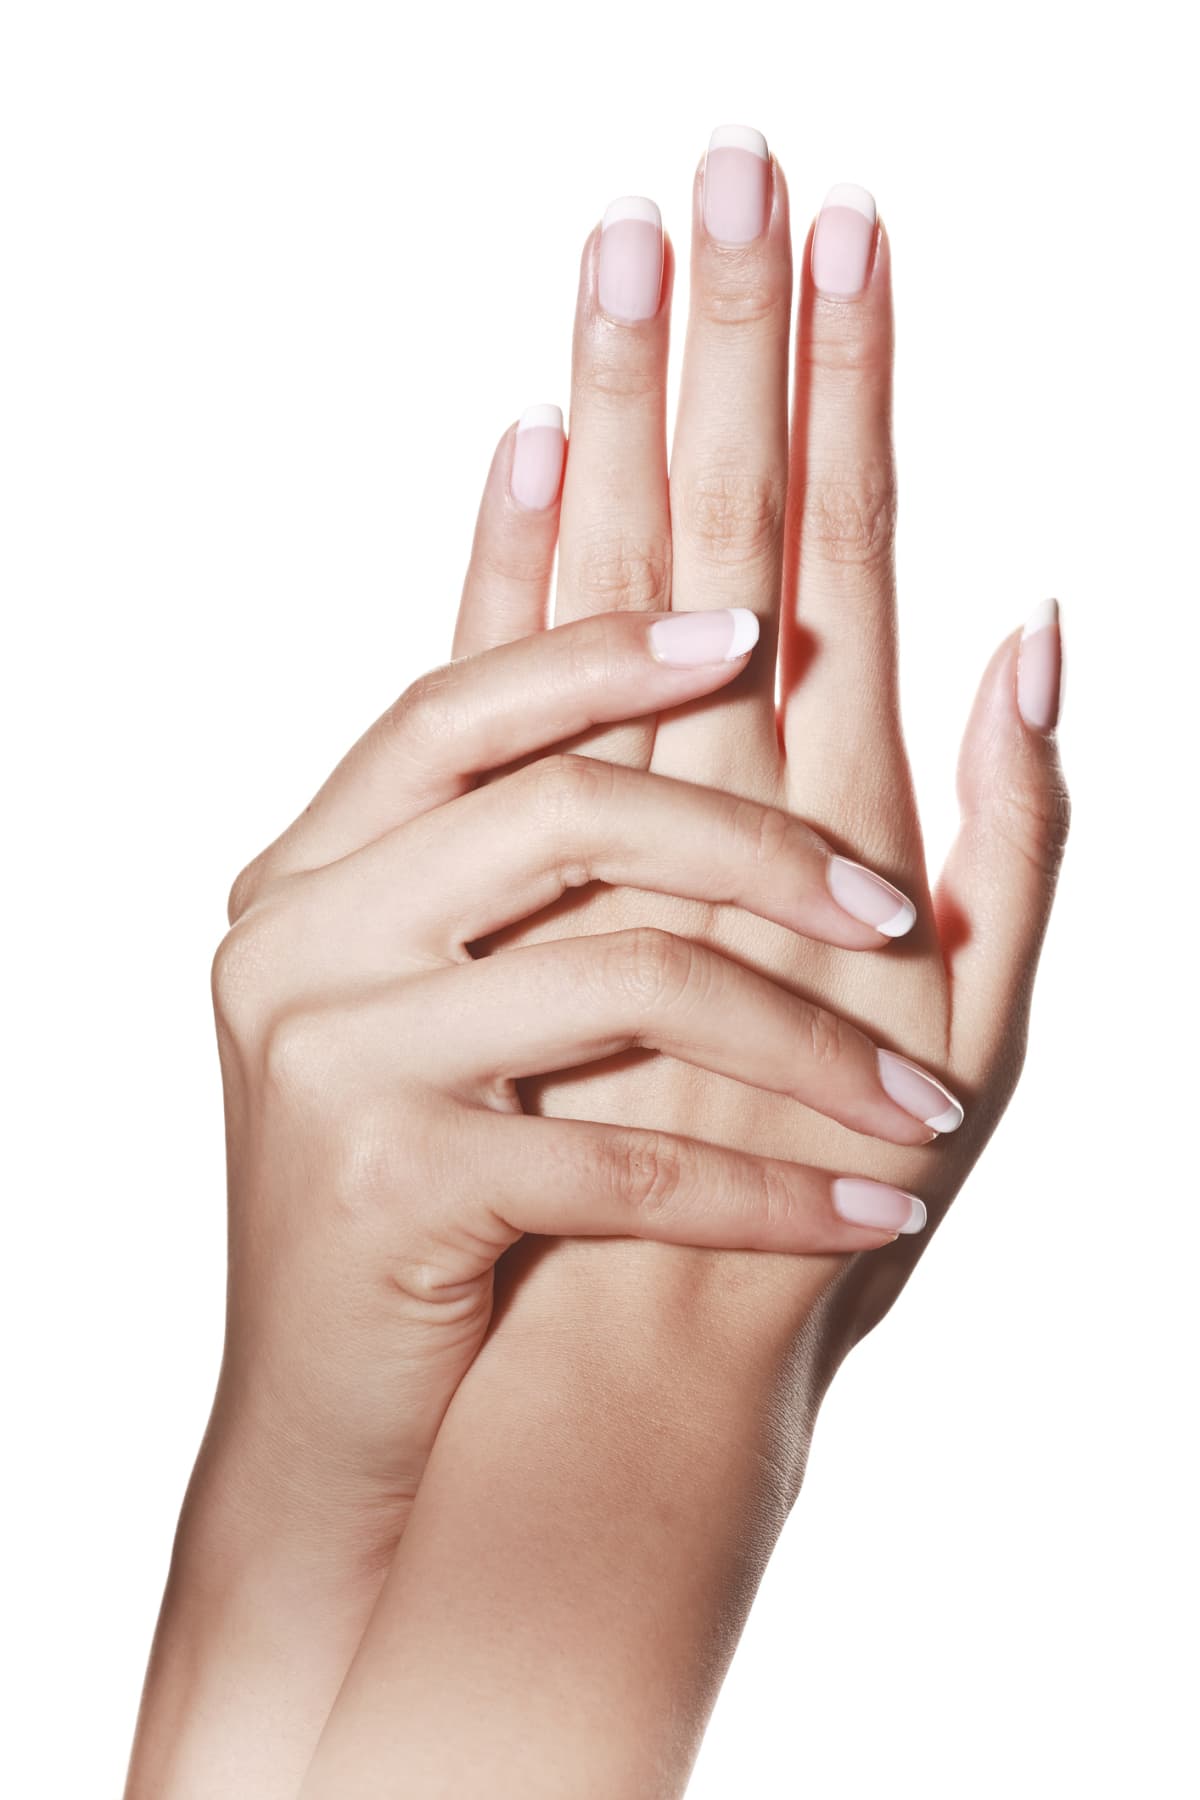 Hands with a natural looking French manicure